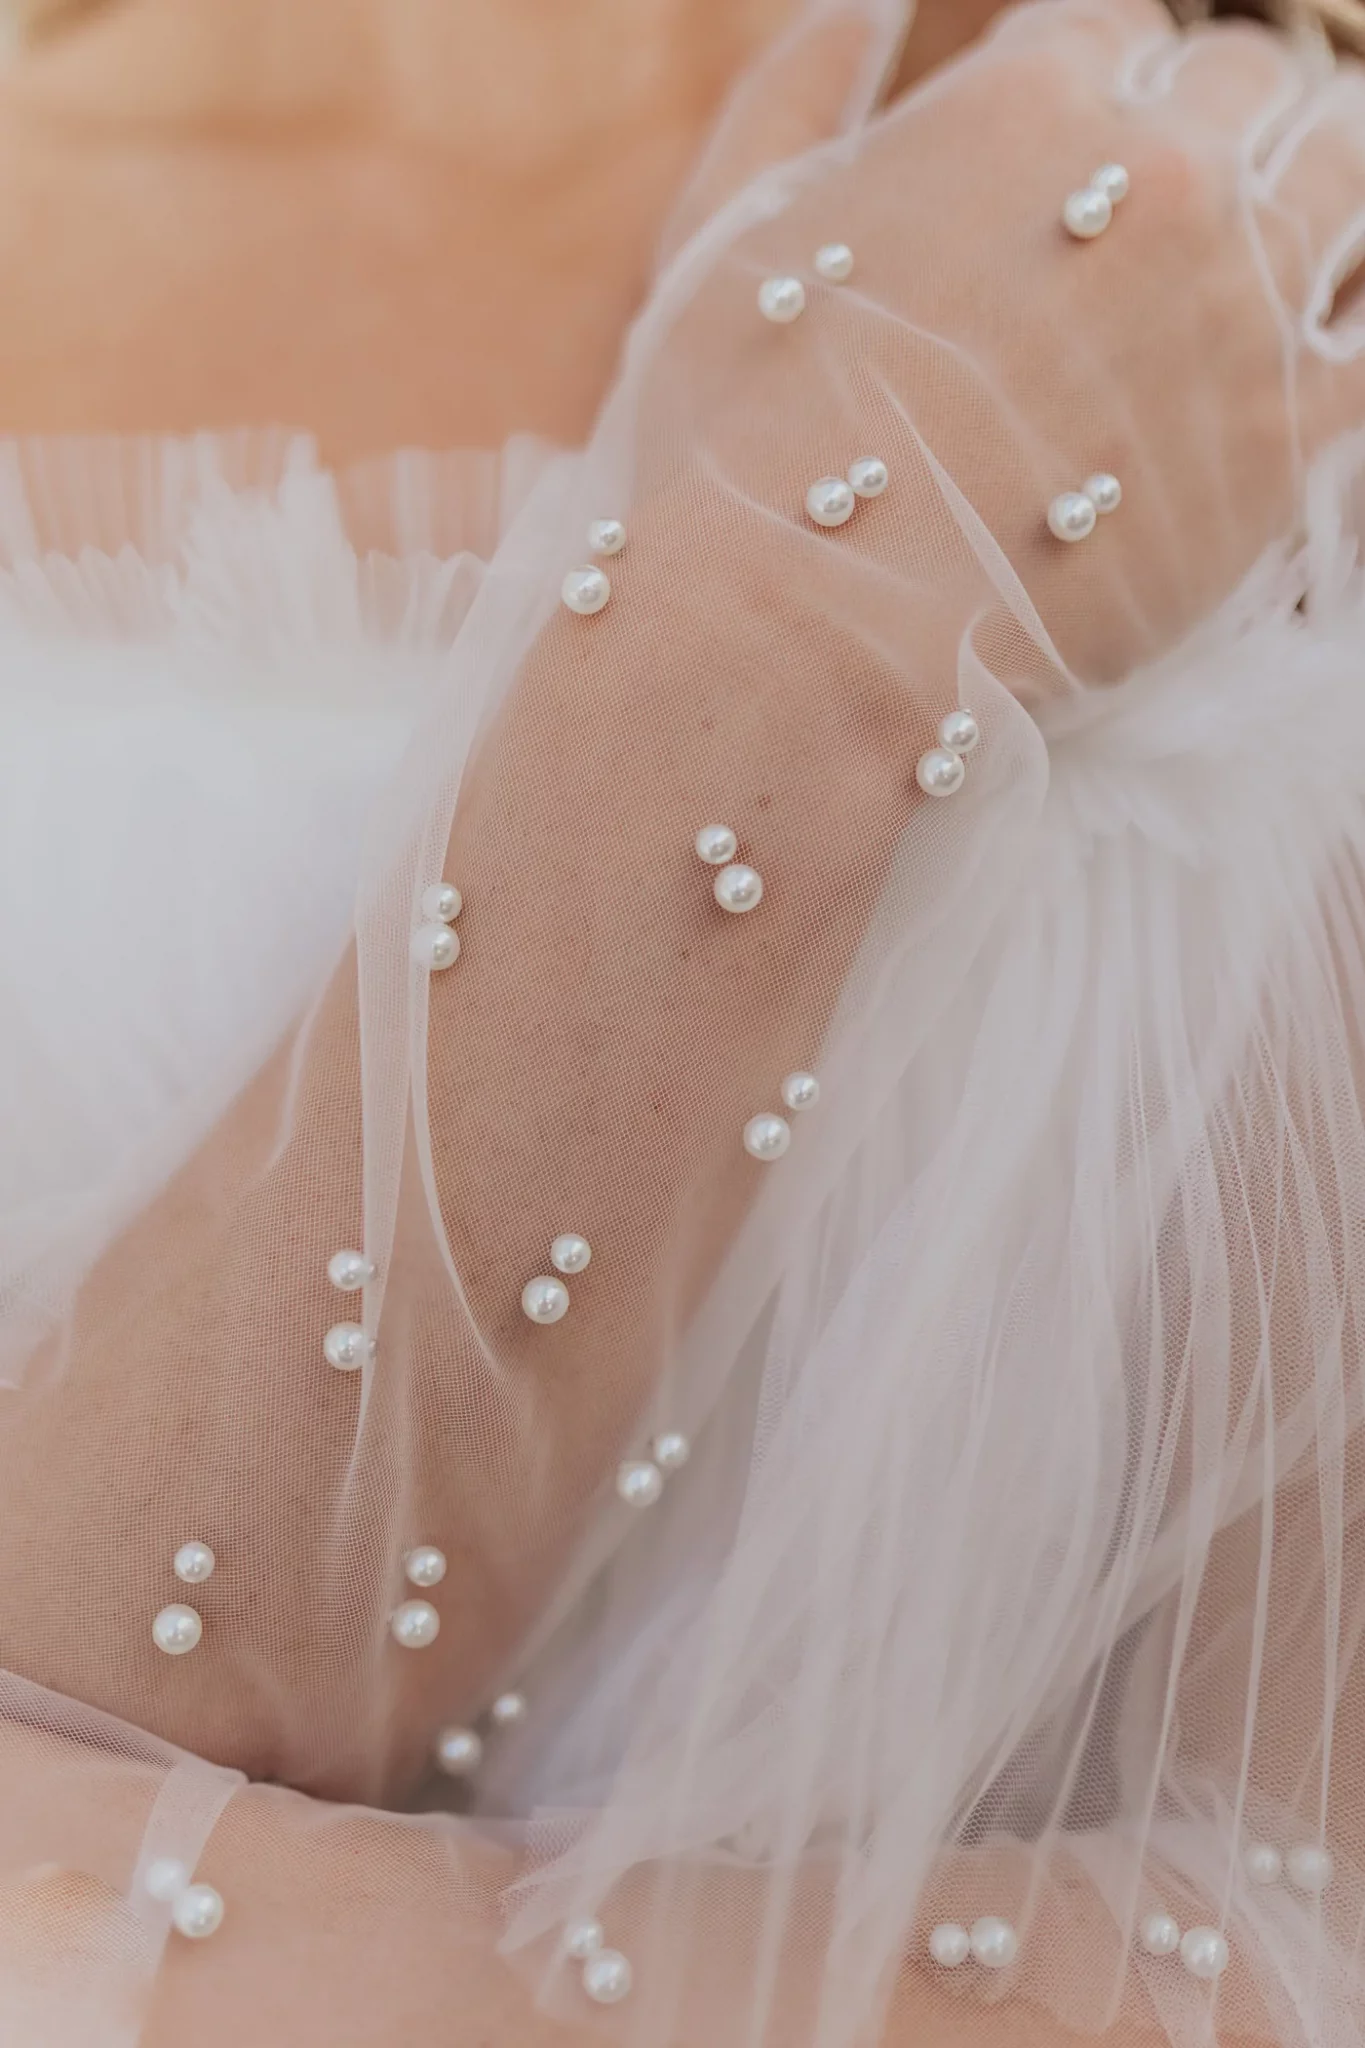 The Most Brilliant Bridal Trends for 2023 - Pearls